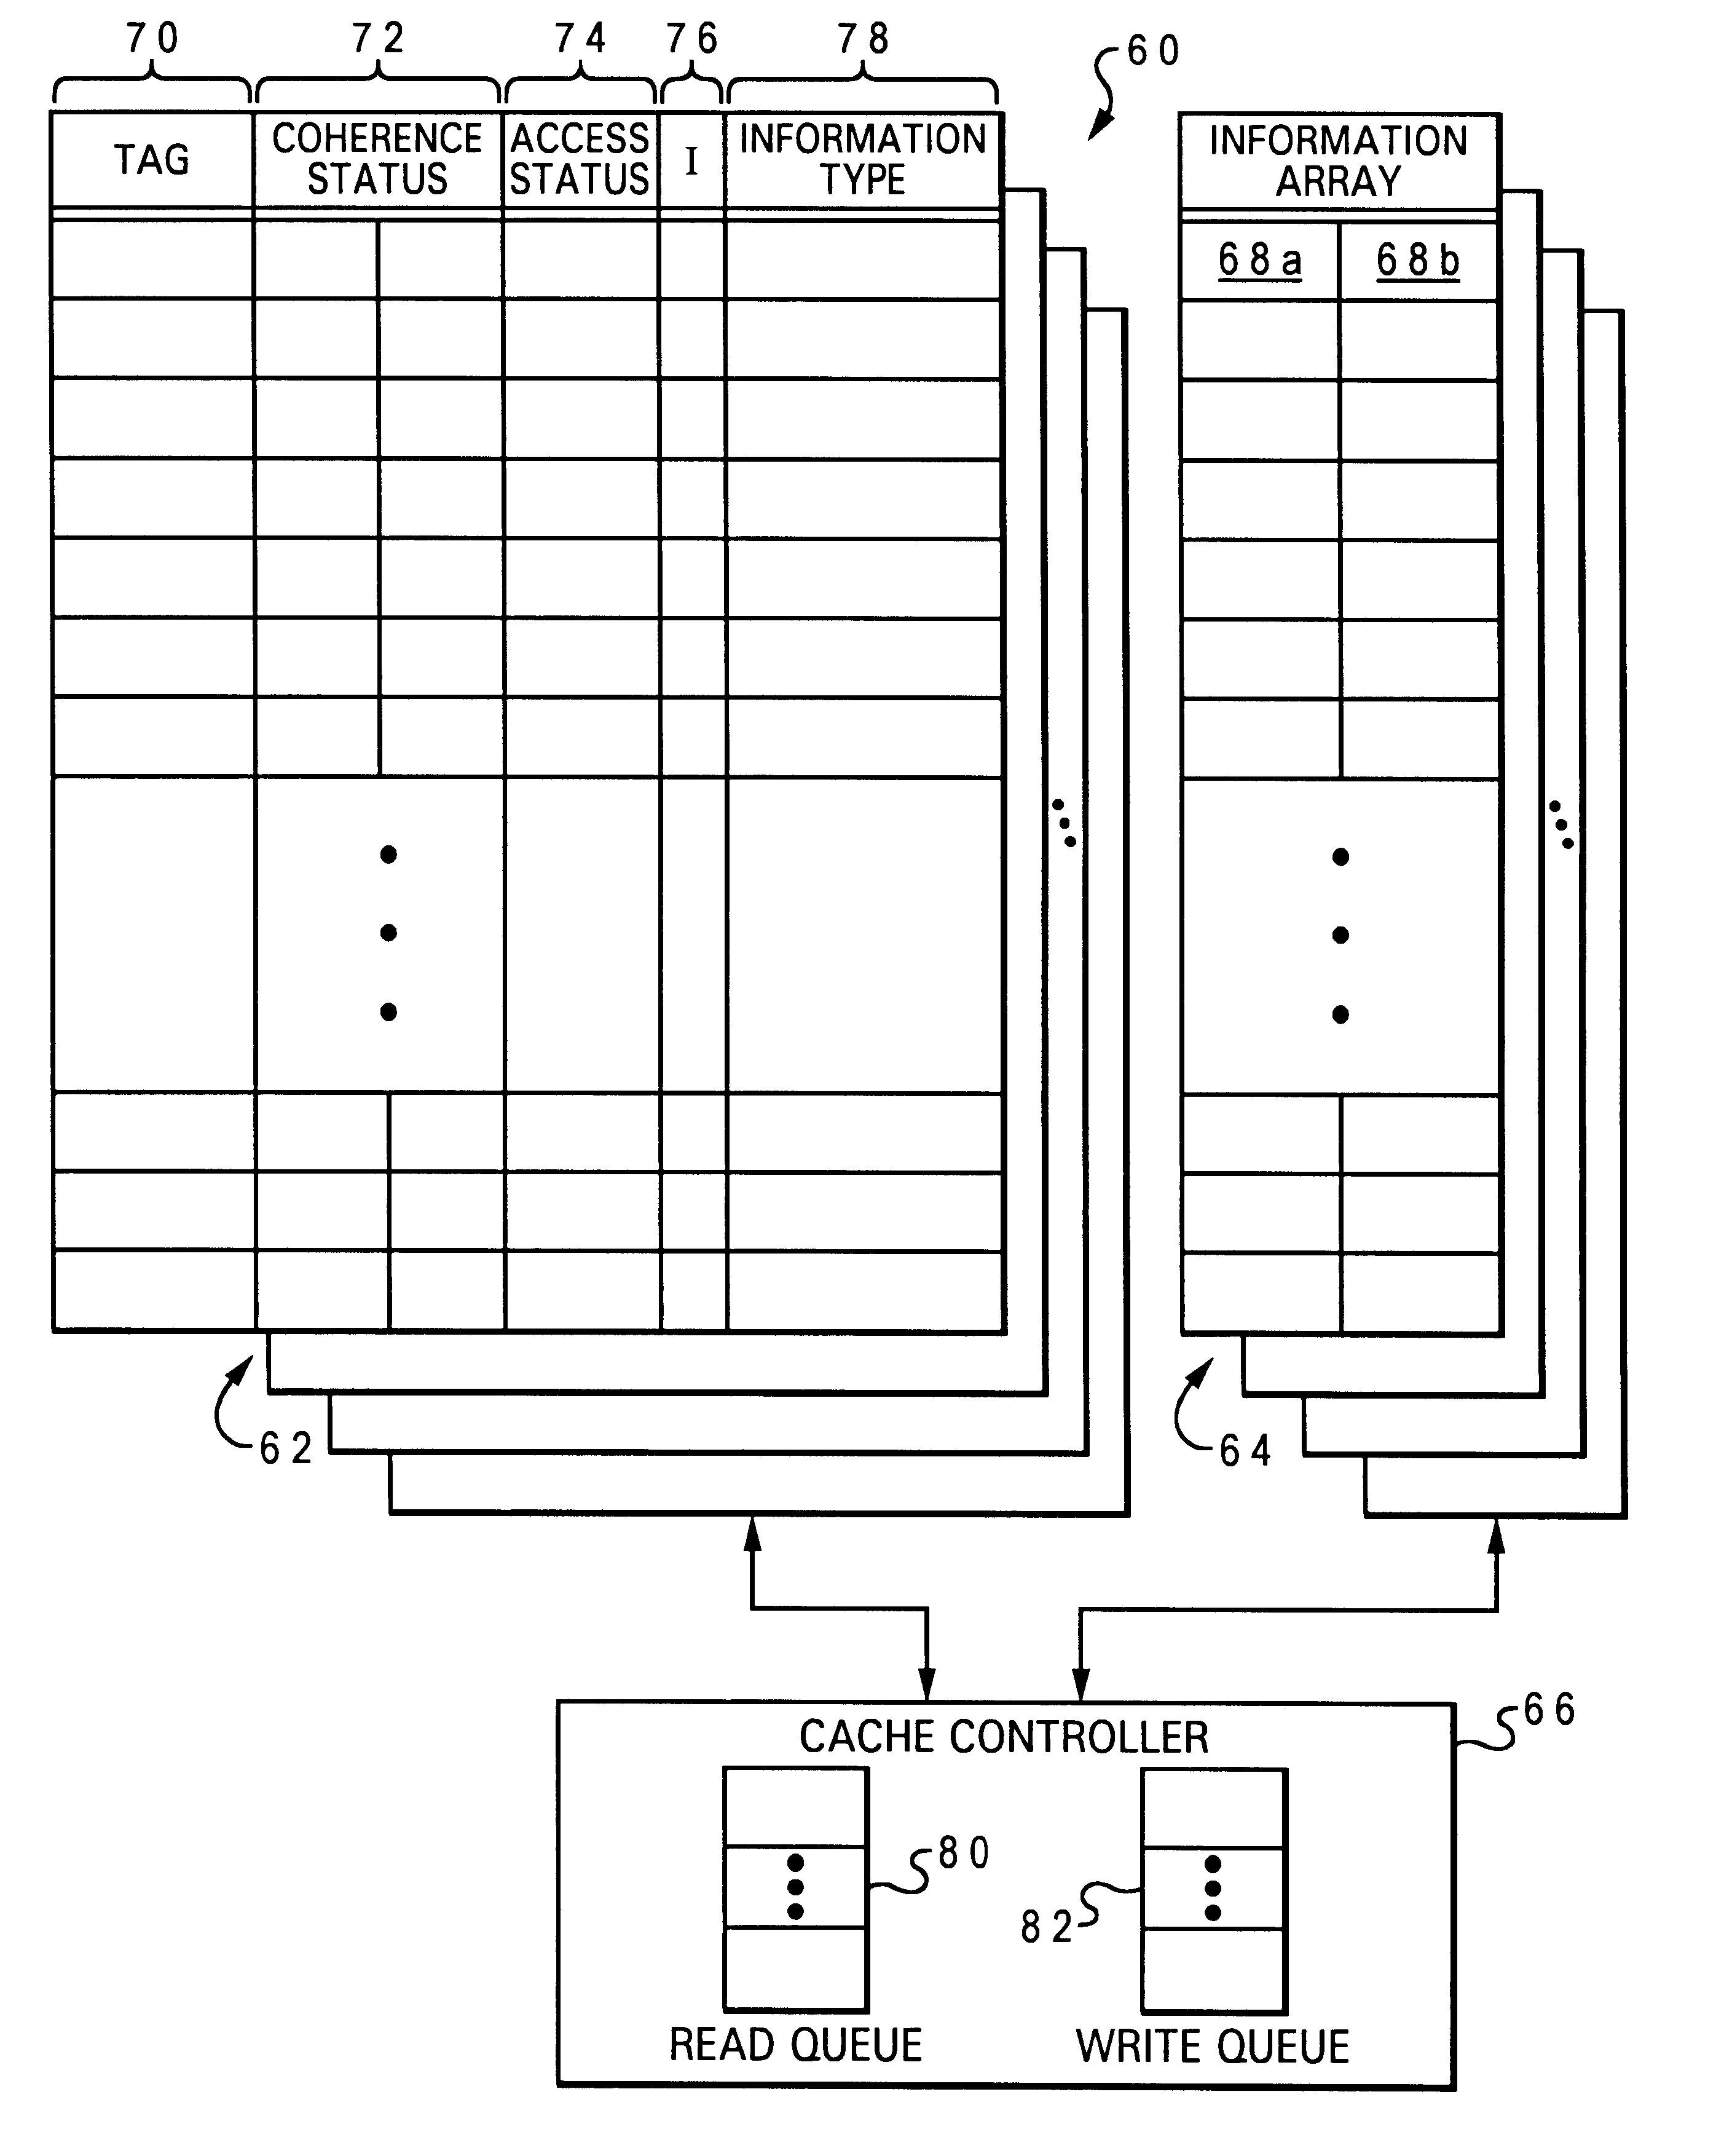 Cache management mechanism to enable information-type dependent cache policies